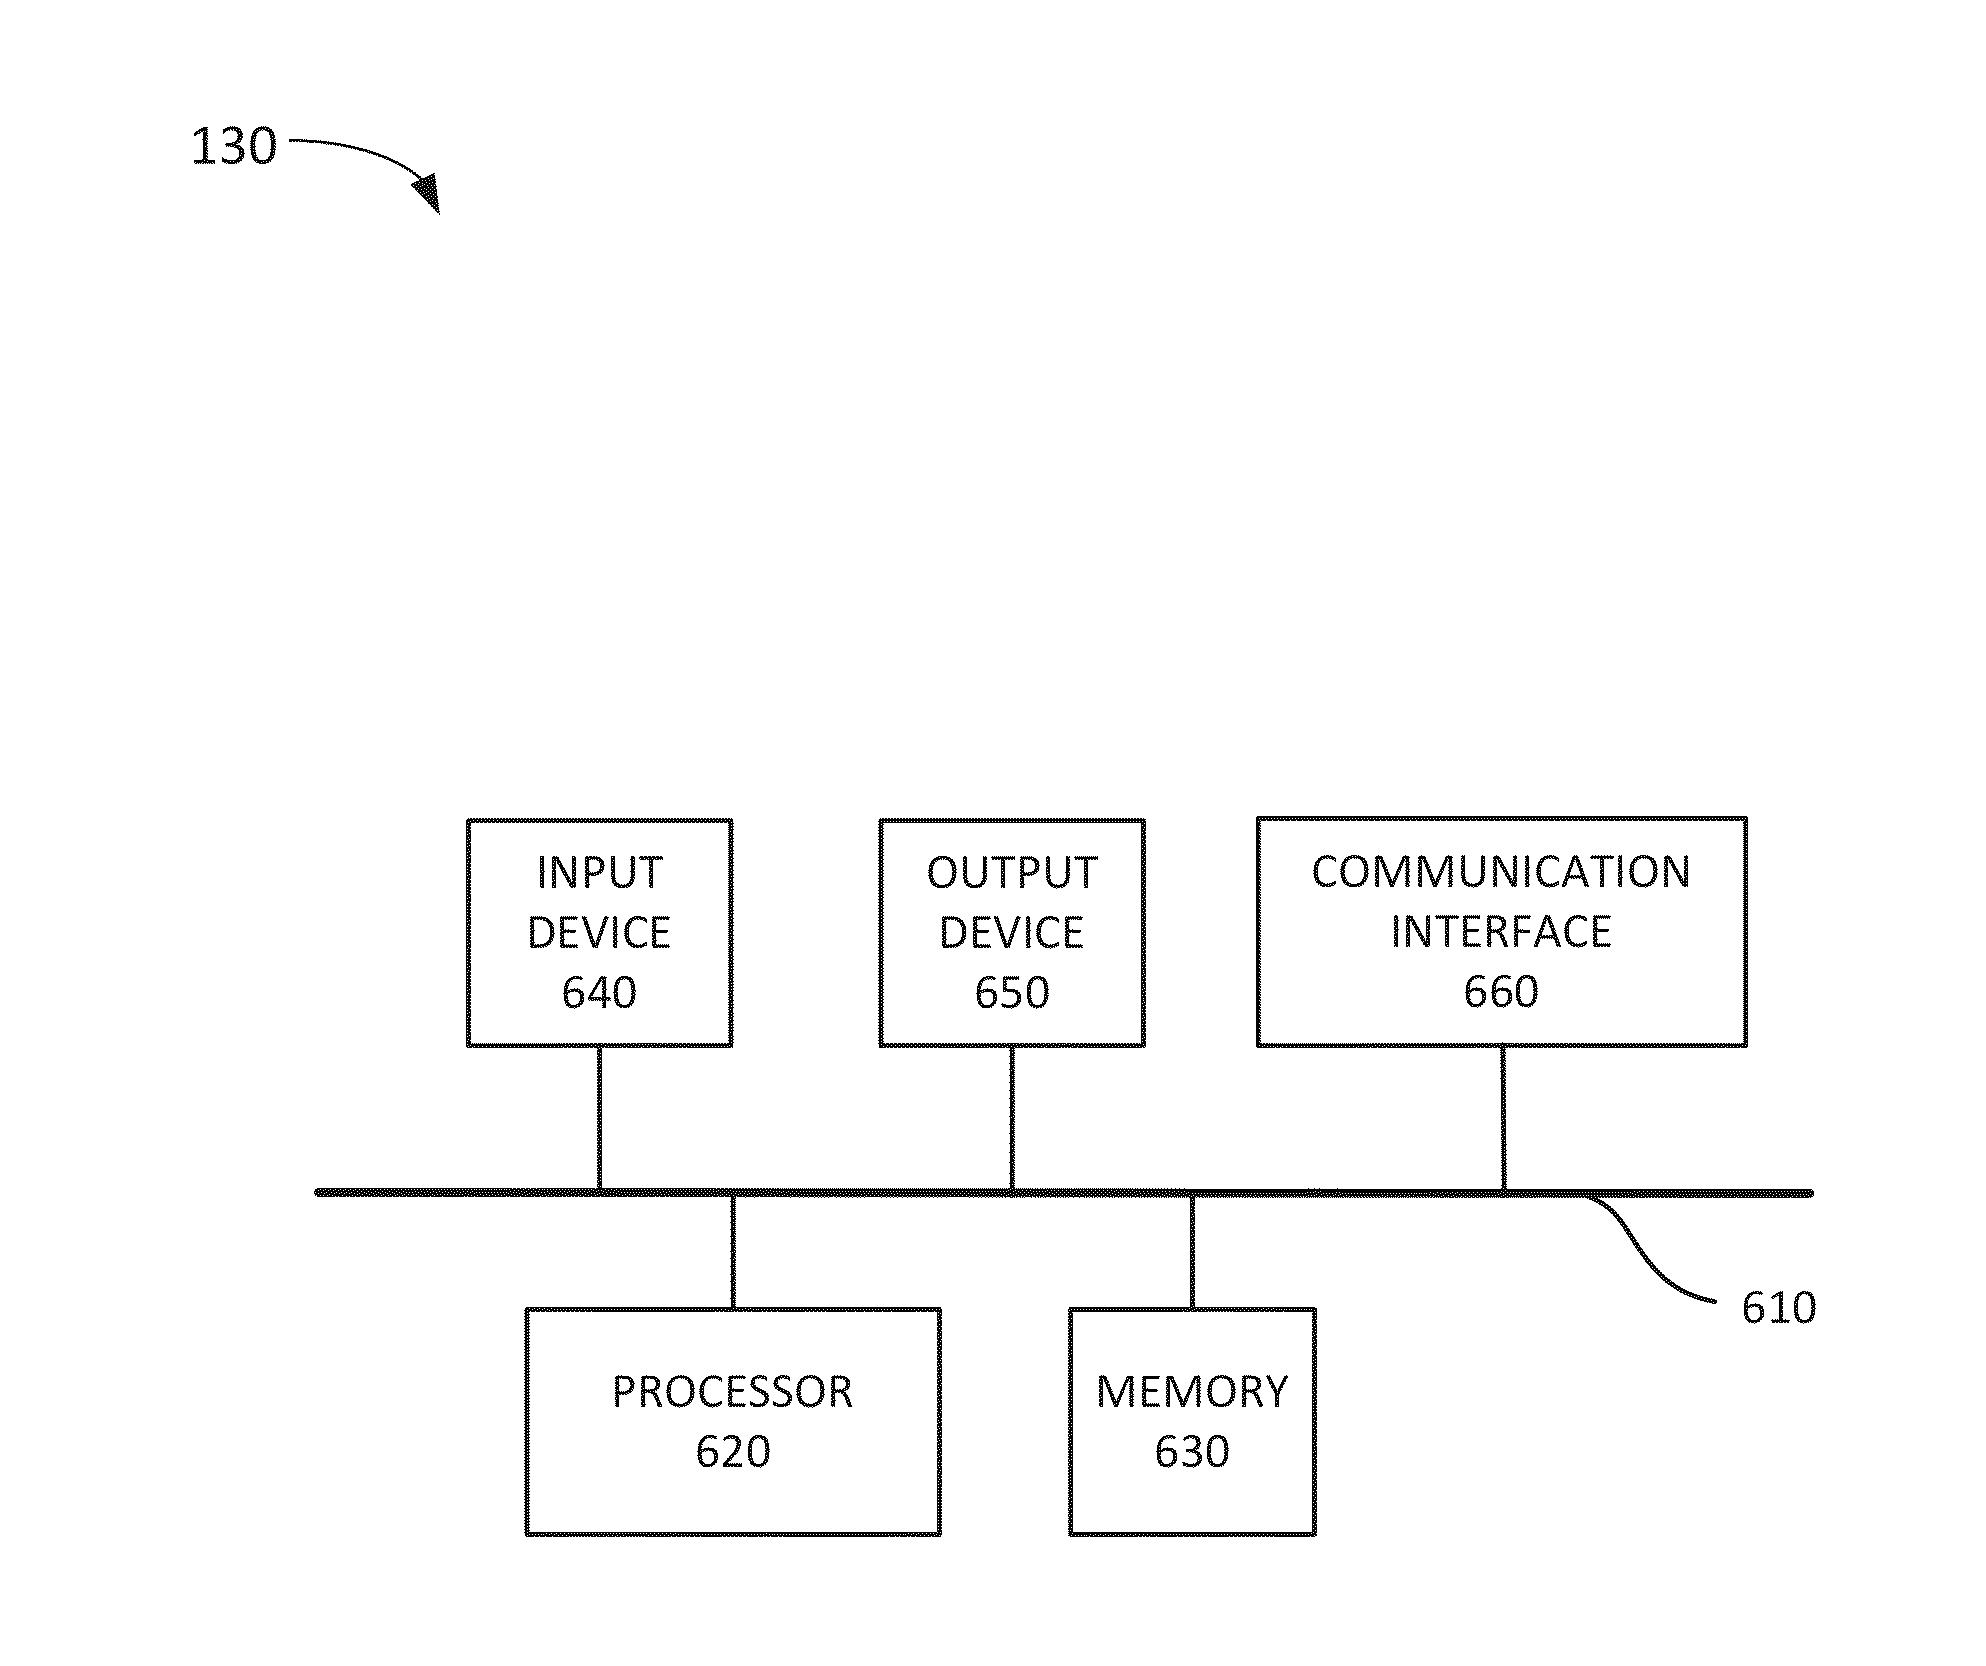 Control system configuration within an operational environment